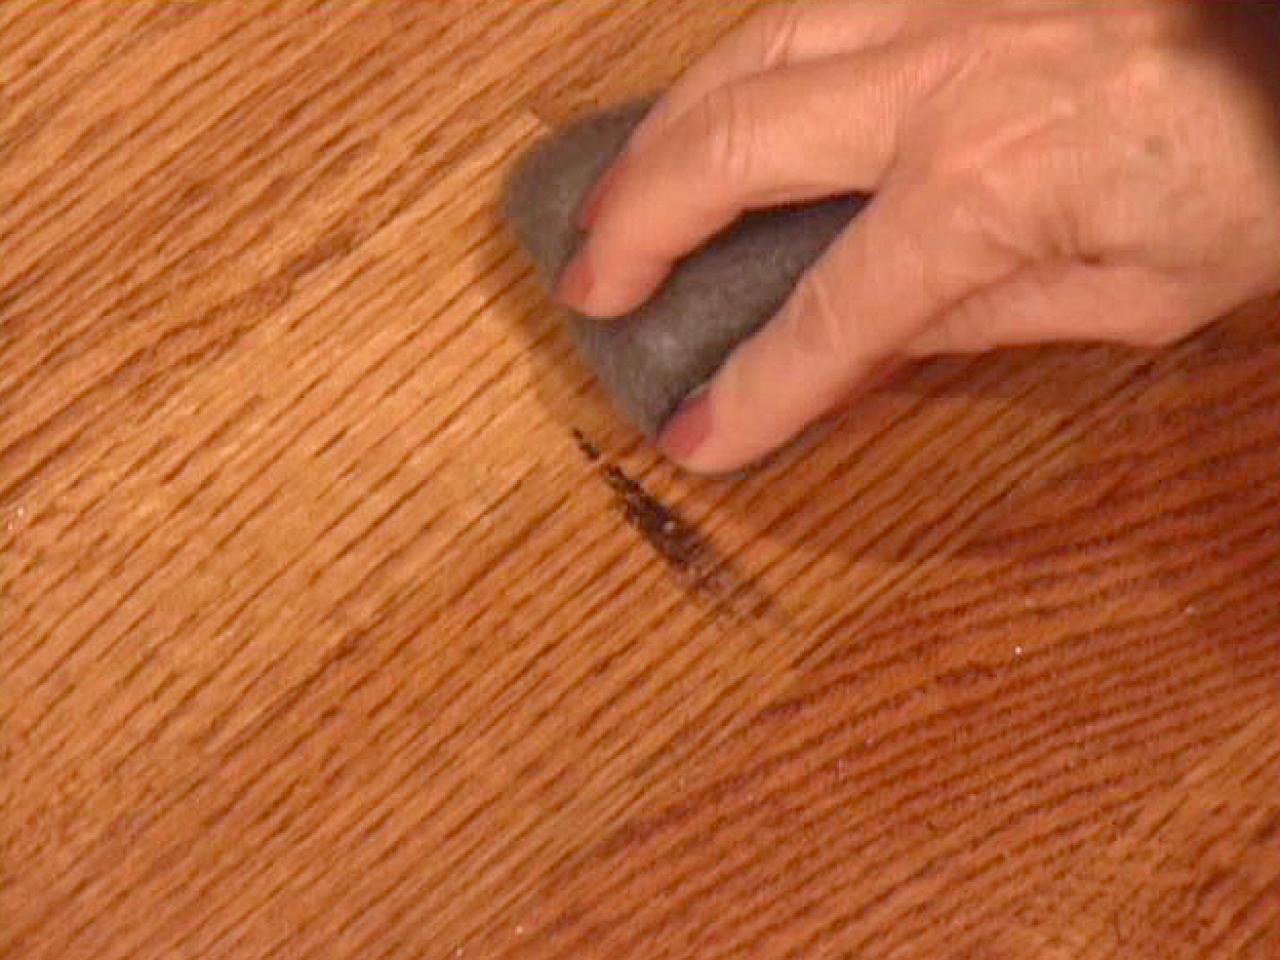 How To Touch Up Wood Floors Tos Diy, How To Remove Scuff Marks From Hardwood Floors